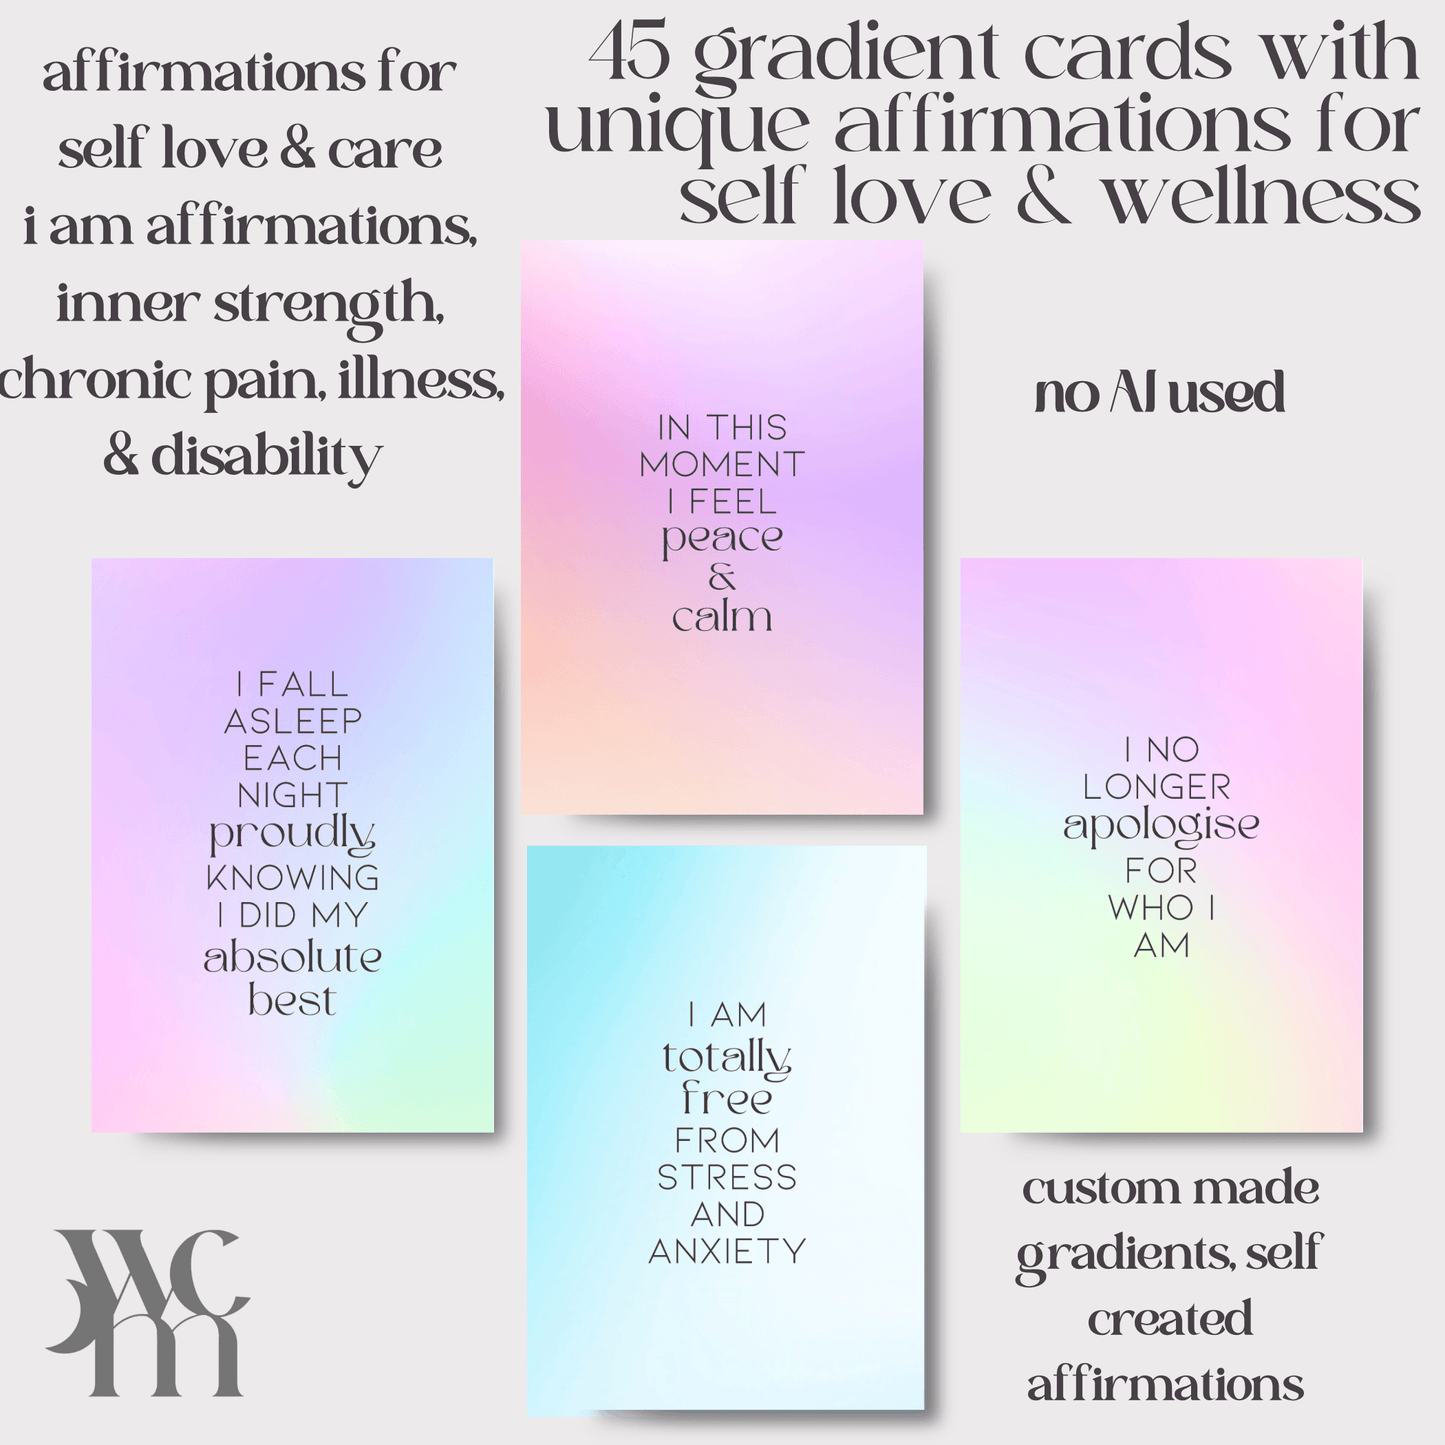 45 digital cards of affirmations, self love, self care, printable - The Wandering Moon Co.